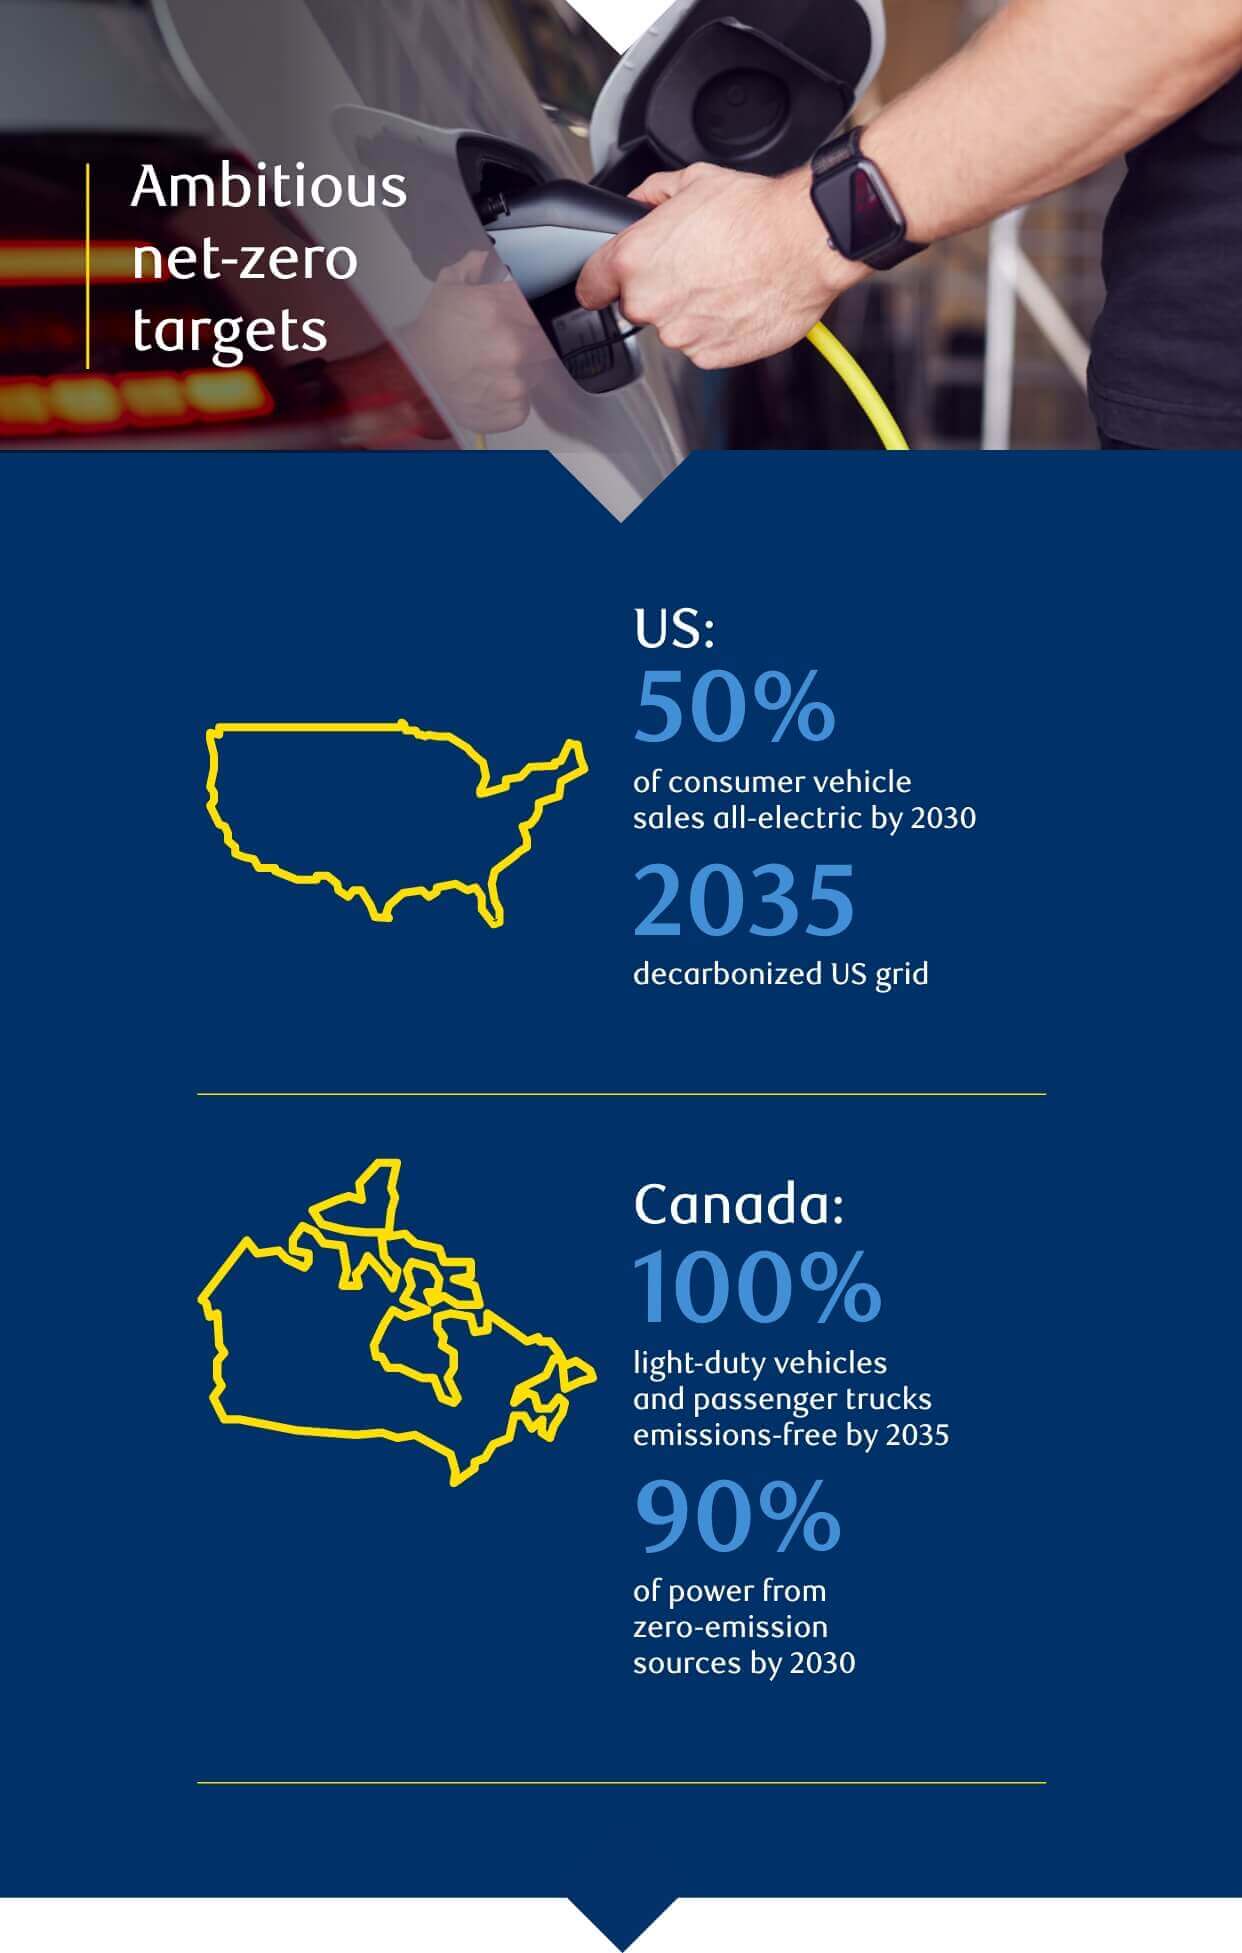 Ambitious net-zero targets for US and Canada - infographic